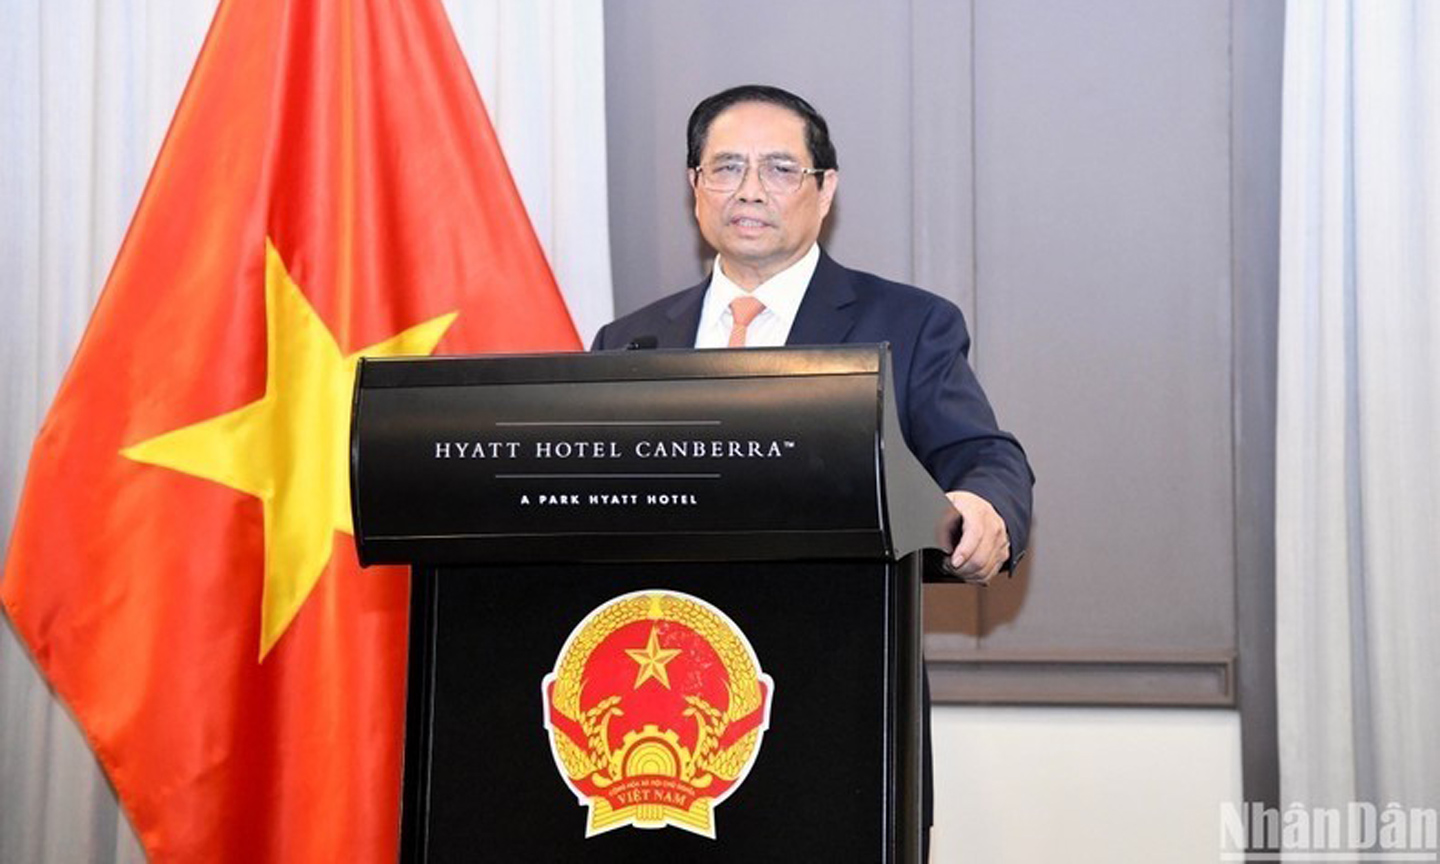 PM Pham Minh Chinh speaks at the event. (Photo: NDO).